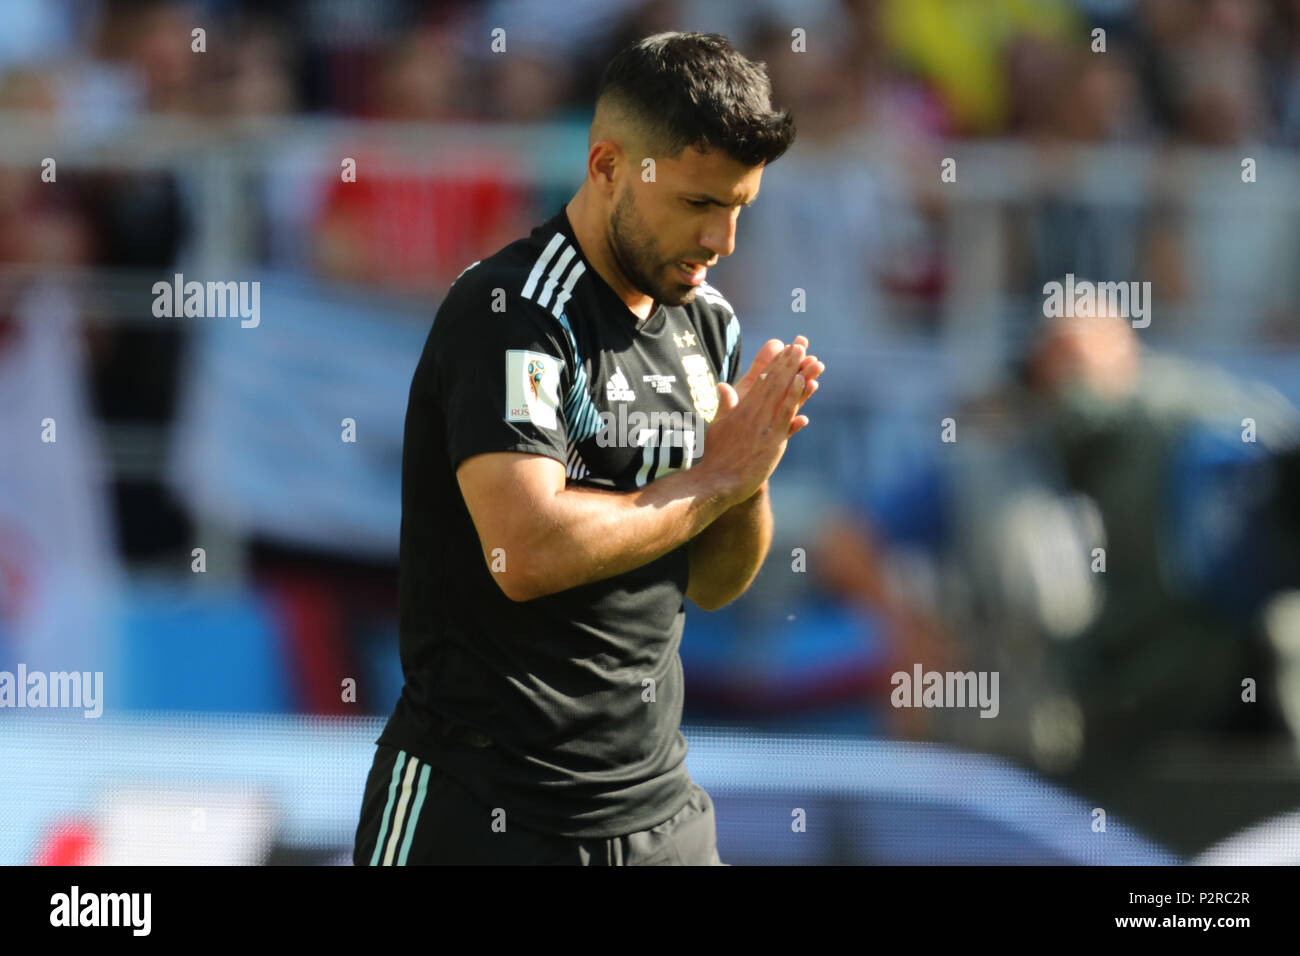 Sergio Aguero ARGENTINA V ICELAND ARGENTINA V ICELAND, 2018 FIFA WORLD CUP RUSSIA 16 June 2018 GBC8111 2018 FIFA World Cup Russia Spartak Stadium Moscow STRICTLY EDITORIAL USE ONLY. If The Player/Players Depicted In This Image Is/Are Playing For An English Club Or The England National Team. Then This Image May Only Be Used For Editorial Purposes. No Commercial Use. The Following Usages Are Also Restricted EVEN IF IN AN EDITORIAL CONTEXT: Use in conjuction with, or part of, any unauthorized audio, video, data, fixture lists, club/league logos, Betting, Games or any 'live' serv Stock Photo